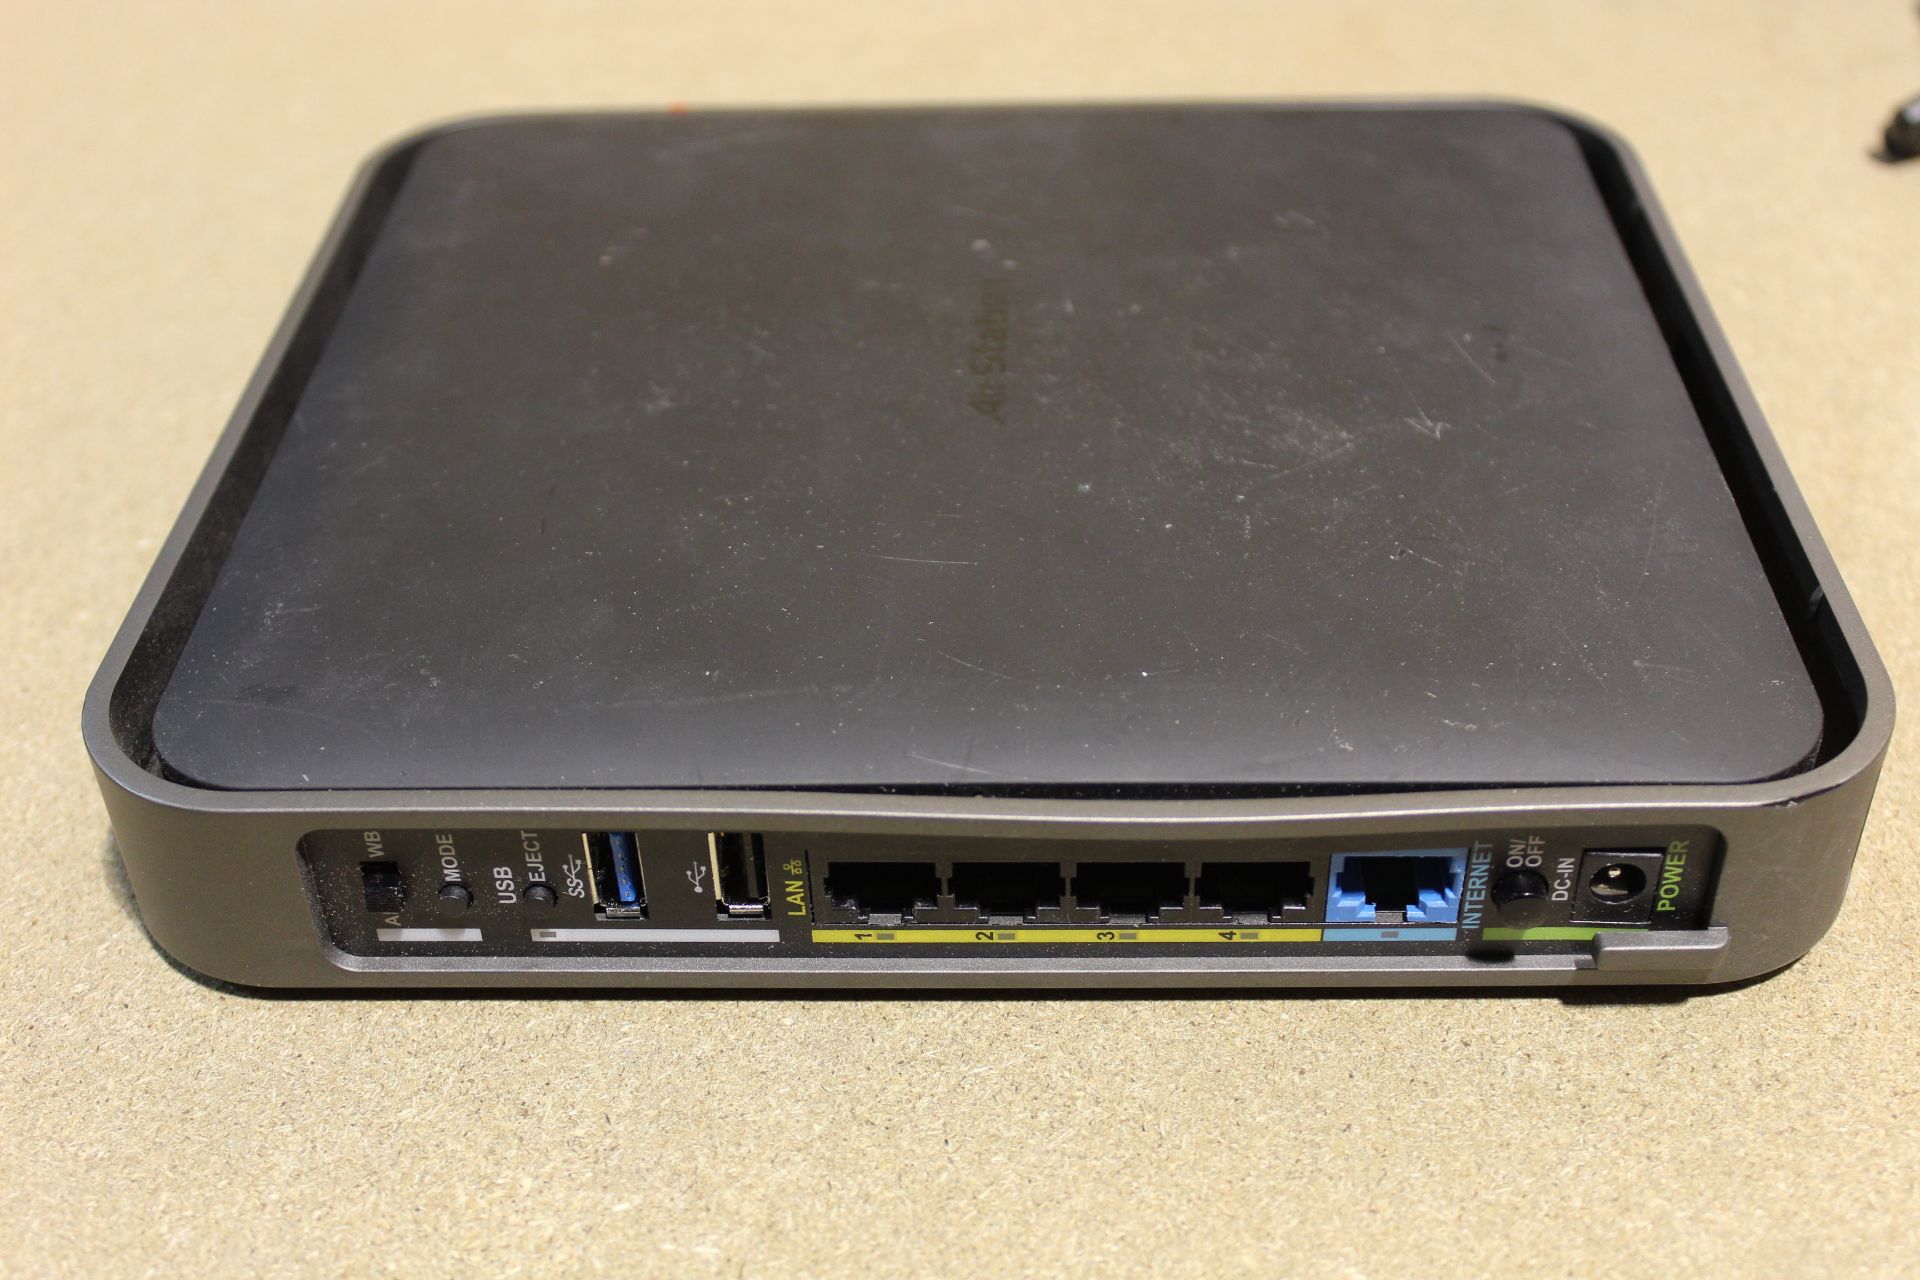 Buffalo WZR-1750DHO Dual Band Wireless Router with 1xPSU in carry case (Purchased on 2017 for £116). - Image 3 of 3